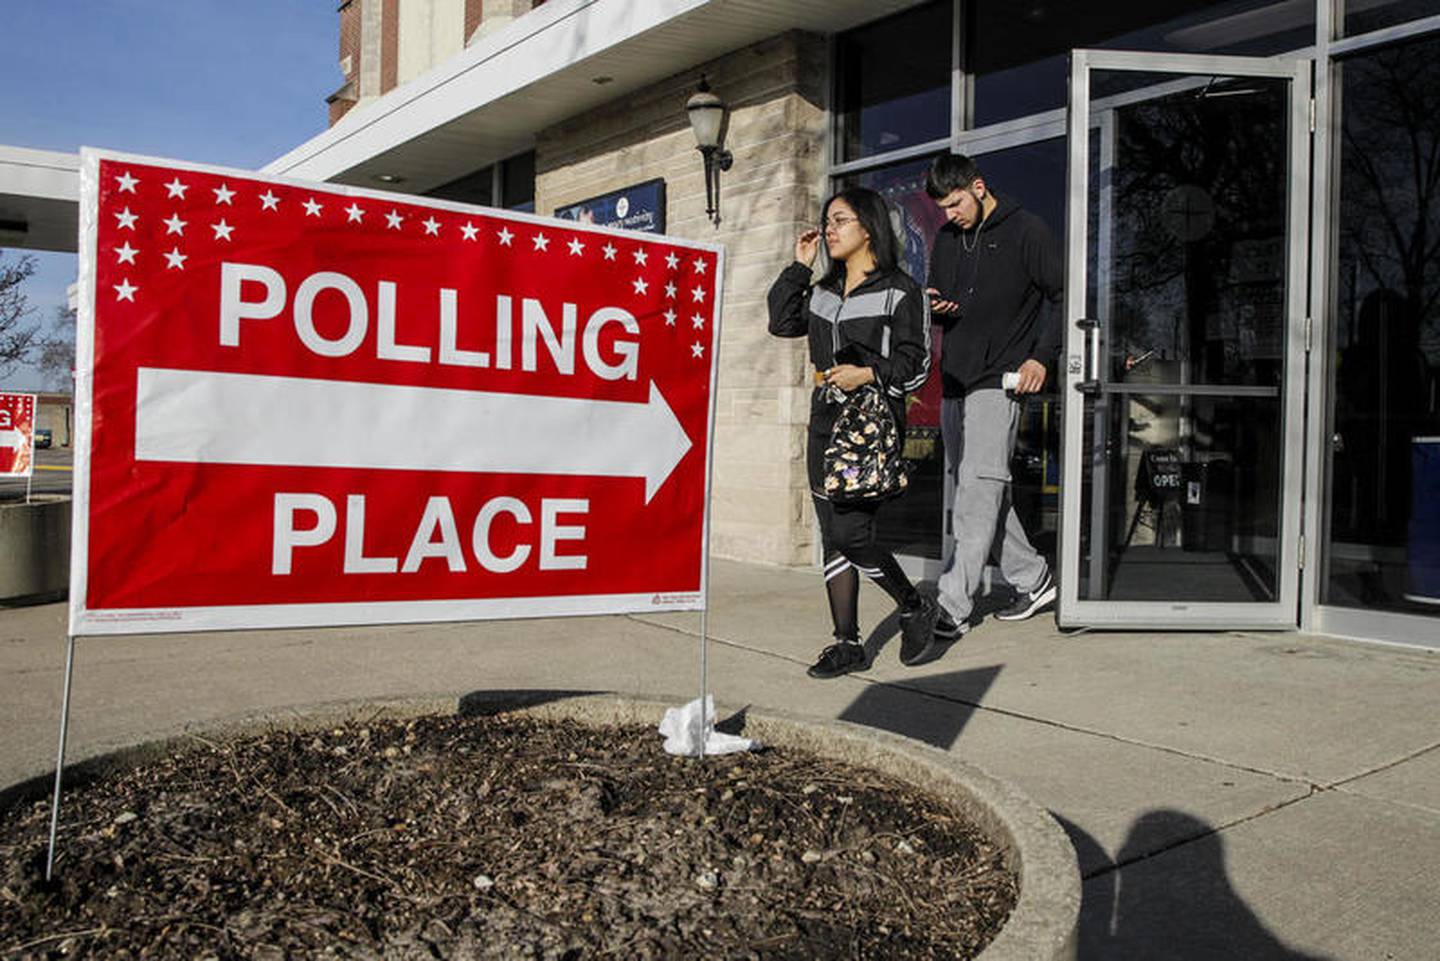 Voters can be seen Tuesday, March 17, 2020, after casting their ballot in Illinois Primary Election at St. Mary Nativity Catholic Church in Joliet, Ill.